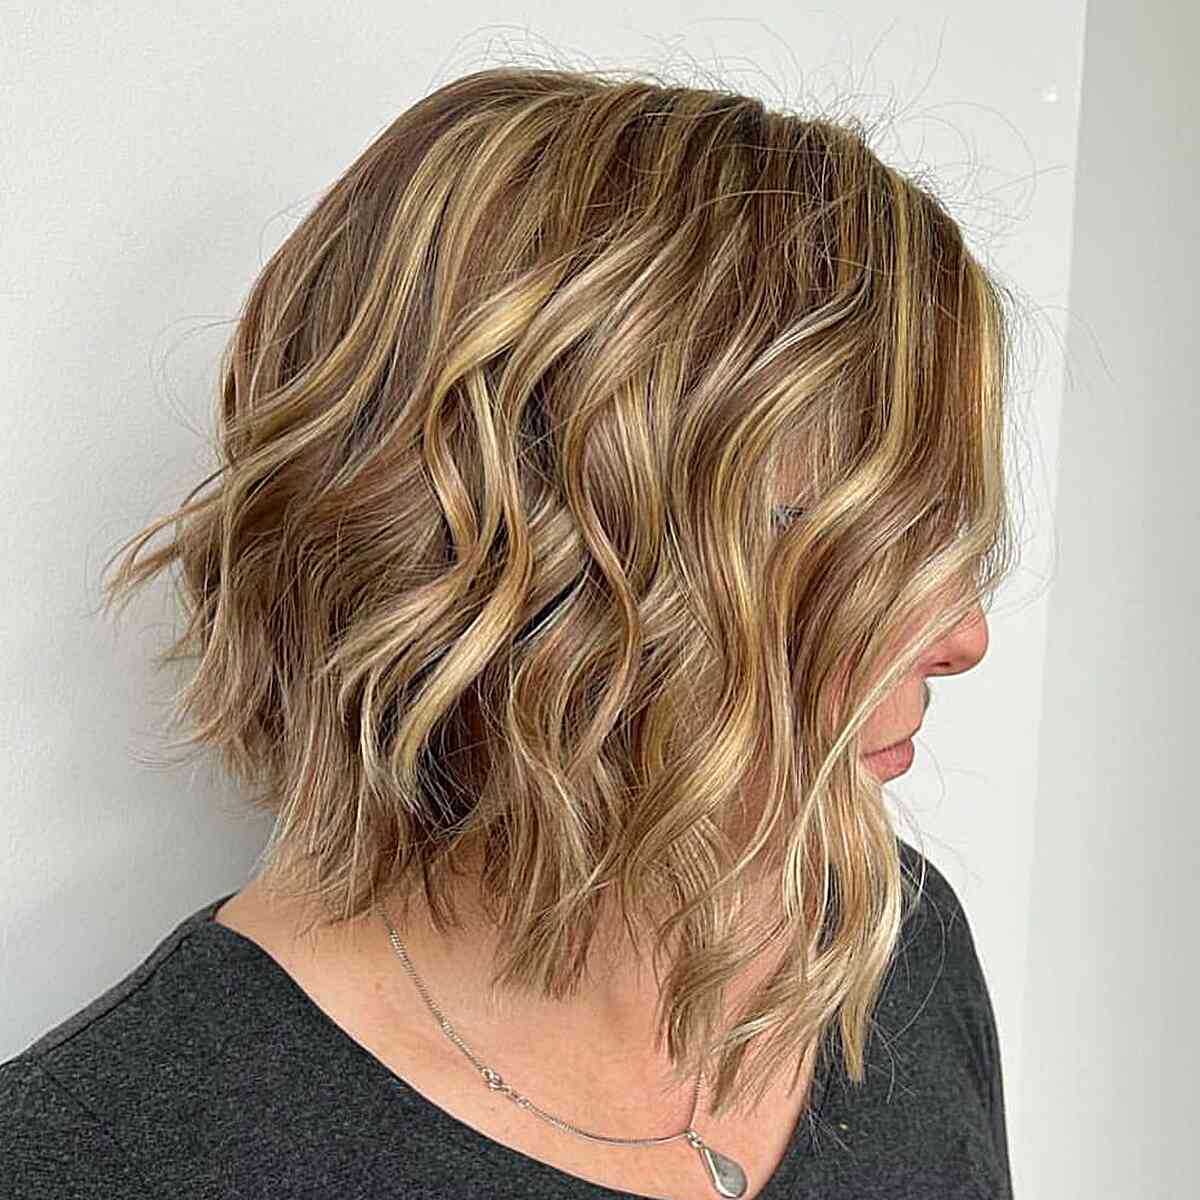 Sassy textured inverted bob for chubby round faces